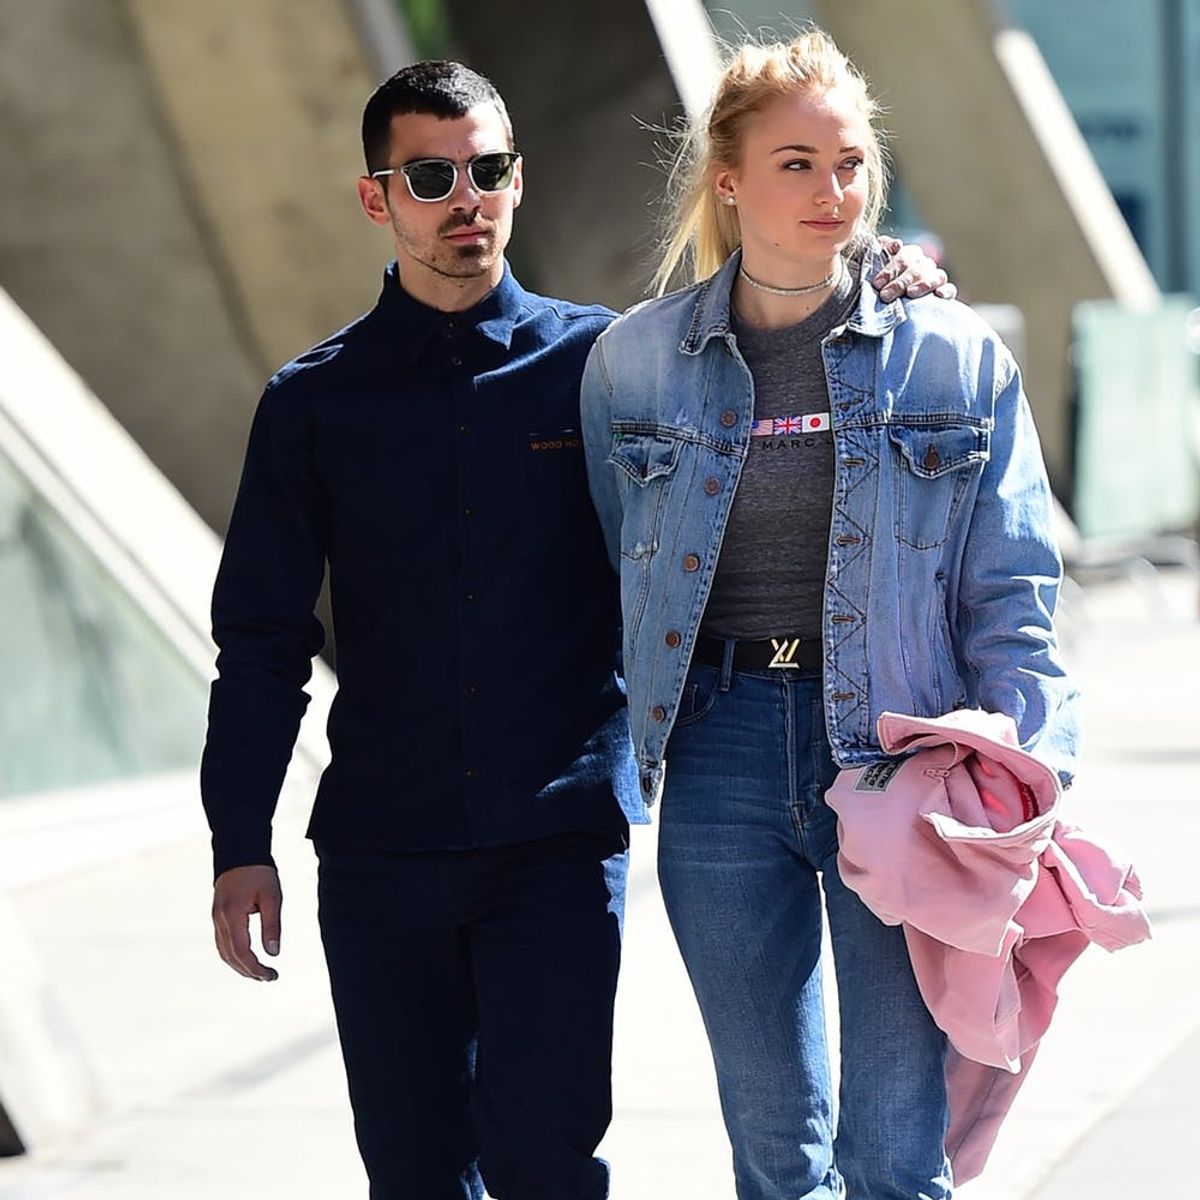 Joe Jonas and Sophie Turner’s Matching Disney-Themed Tattoos Are Out of This World